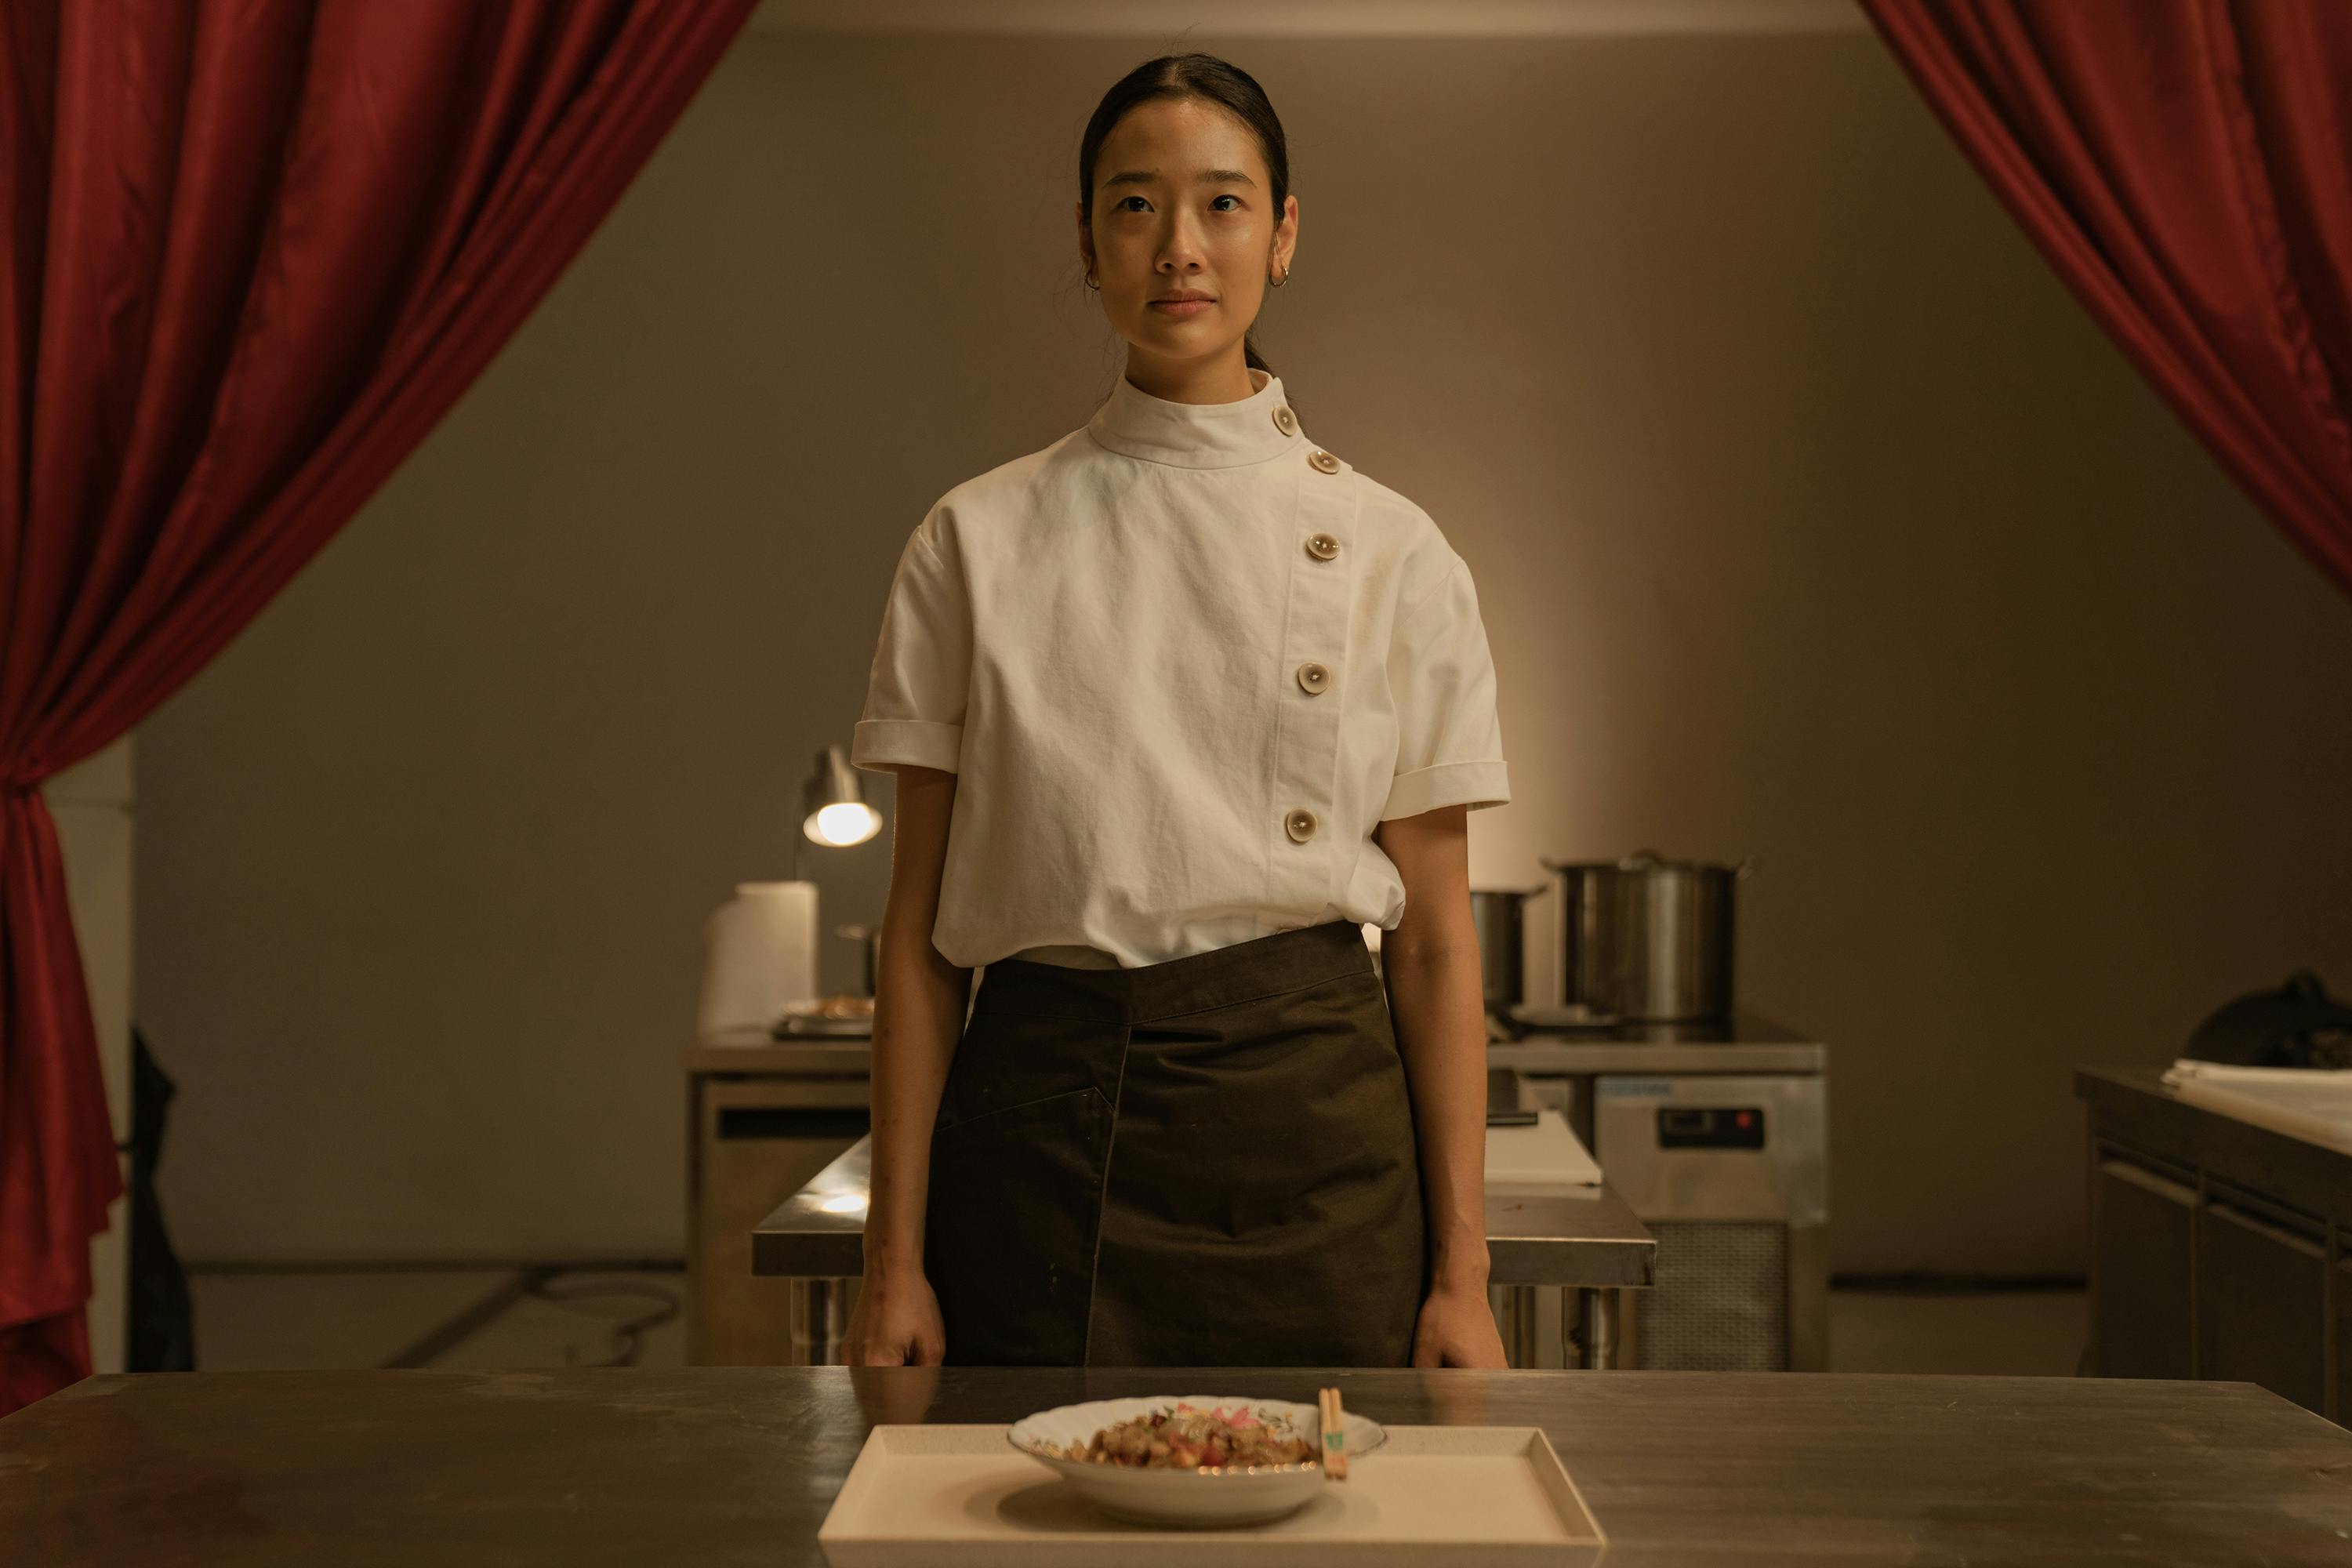 Hunger Cooks up a Culinary Thriller